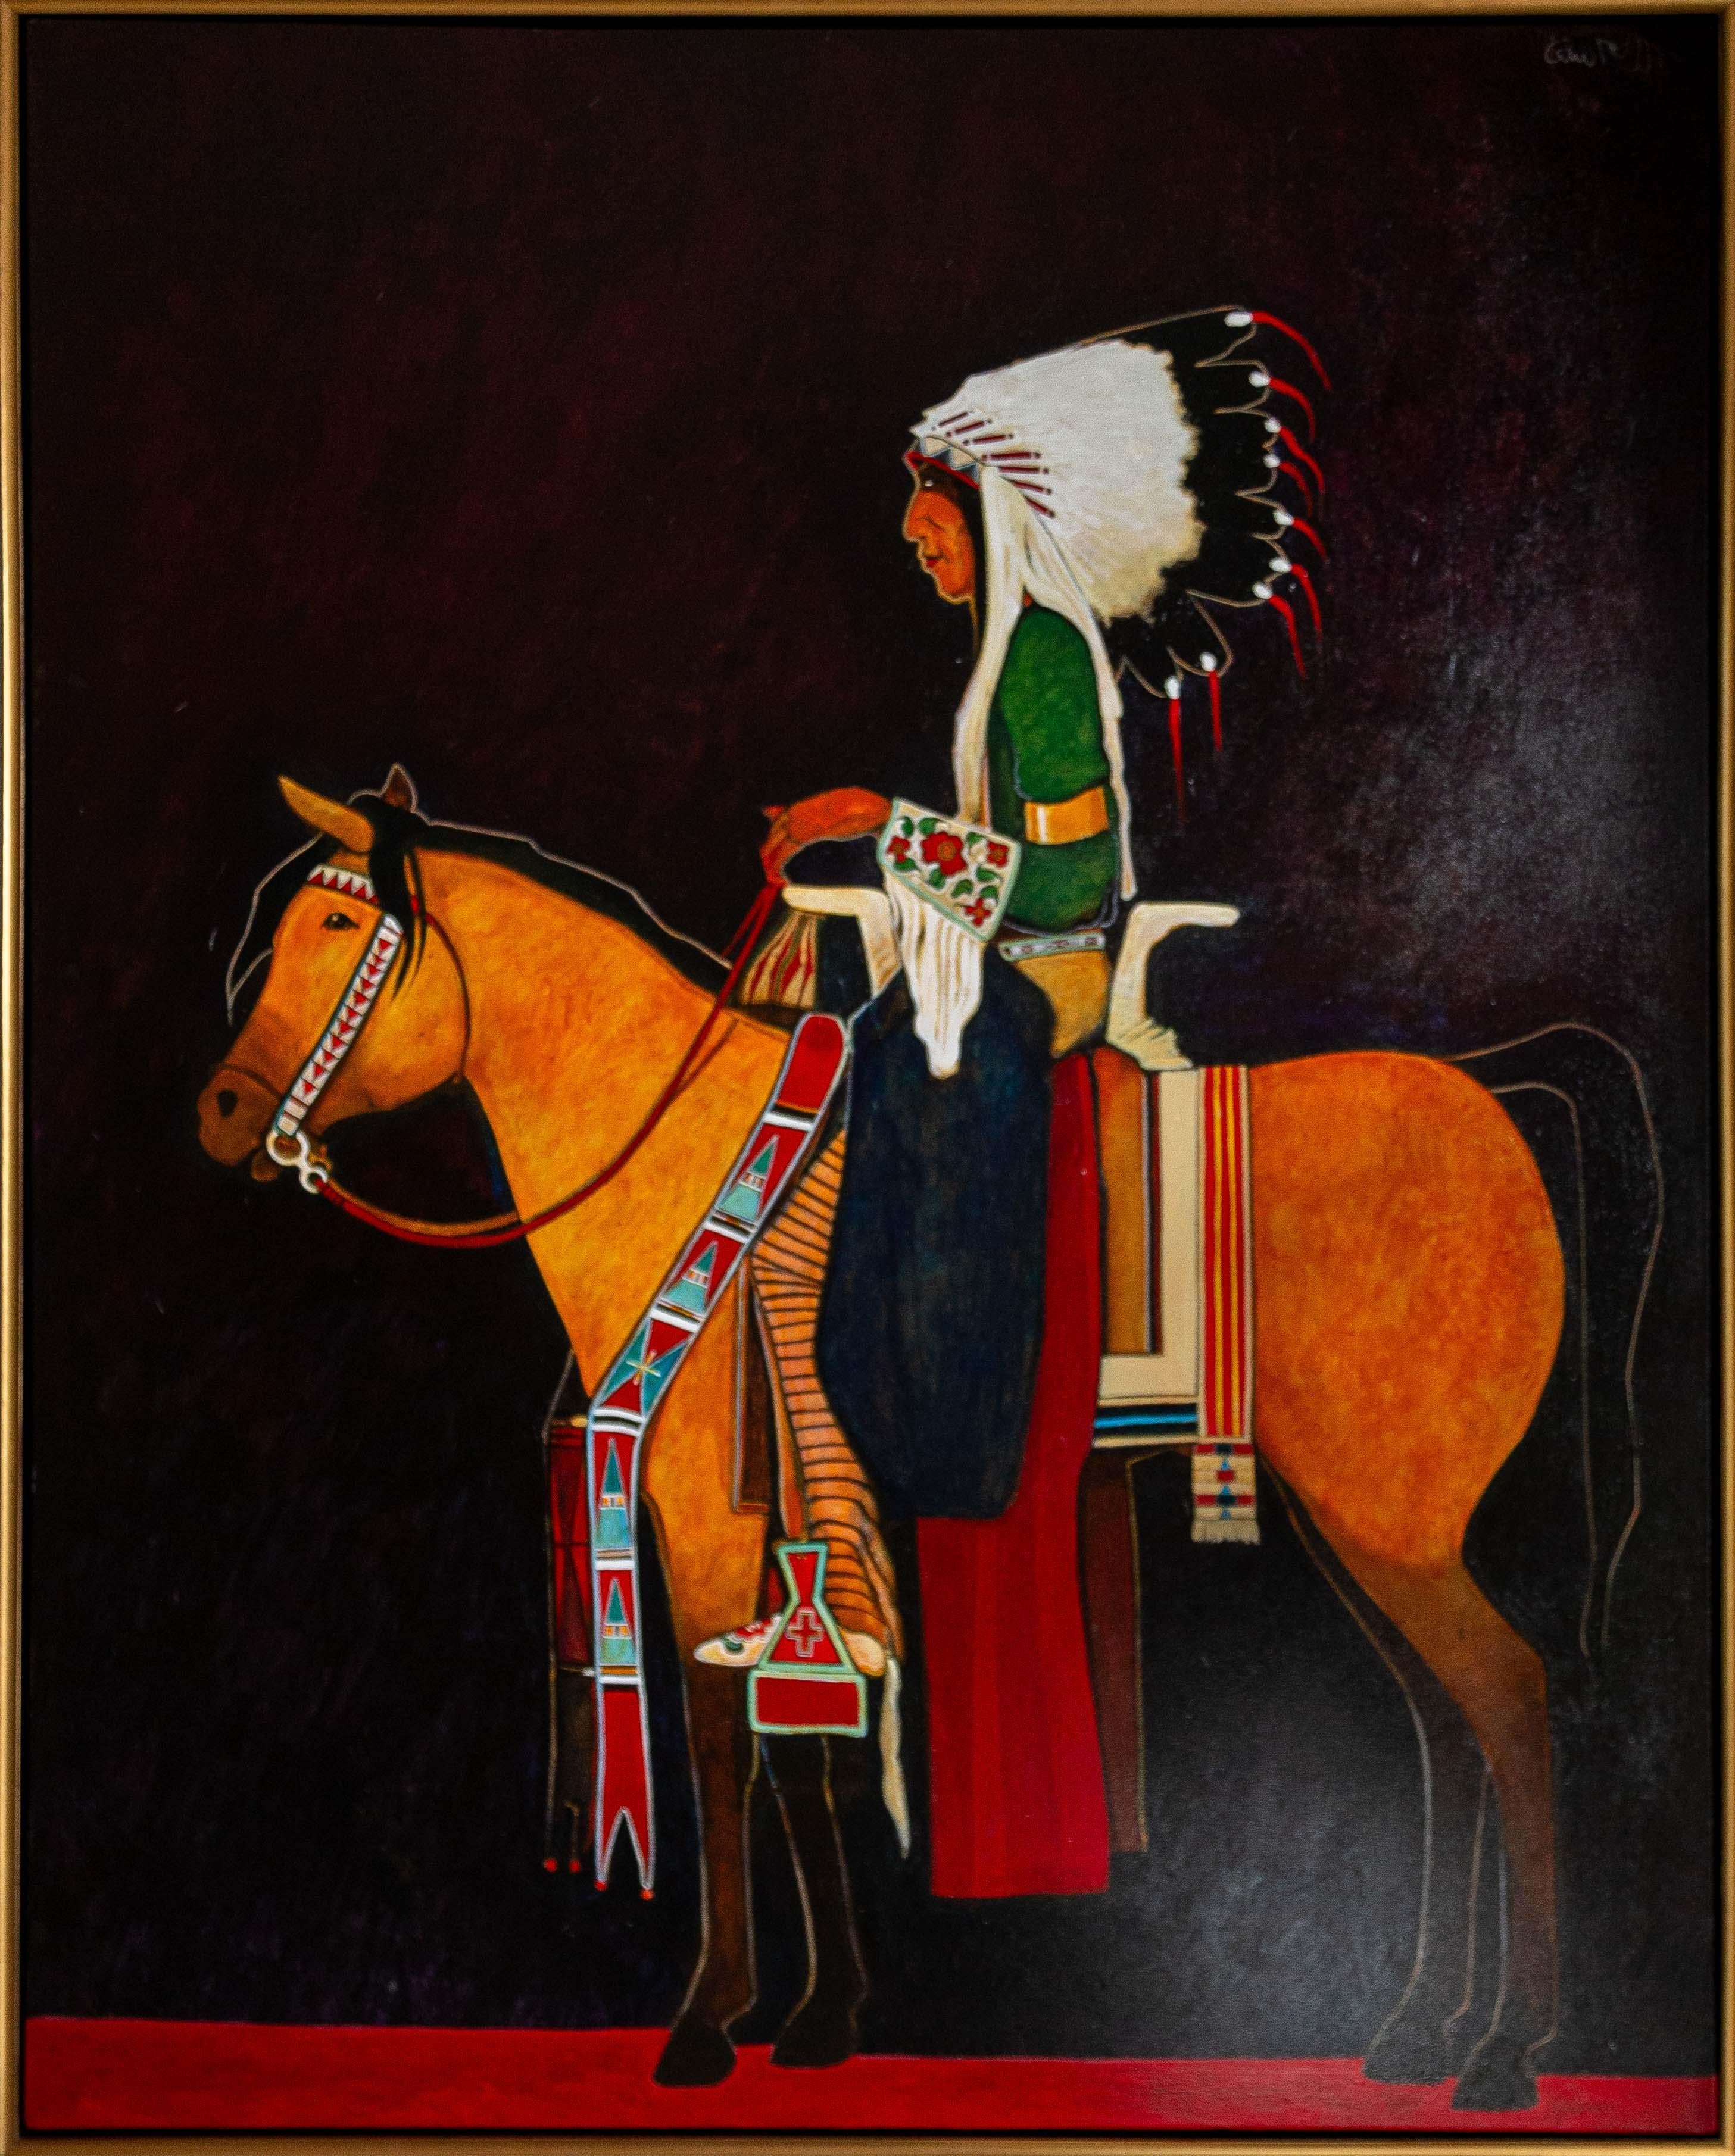 "Shows Little on Parade Horse on the Red Road" by Kevin Red Star. He is a Crow Elder that teaches the young ones to parade. Acrylic, Mixed Media on Canvas, 60" x 48", 63" x 51" (framed).
Kevin Red Star’s art is honored throughout Native America for